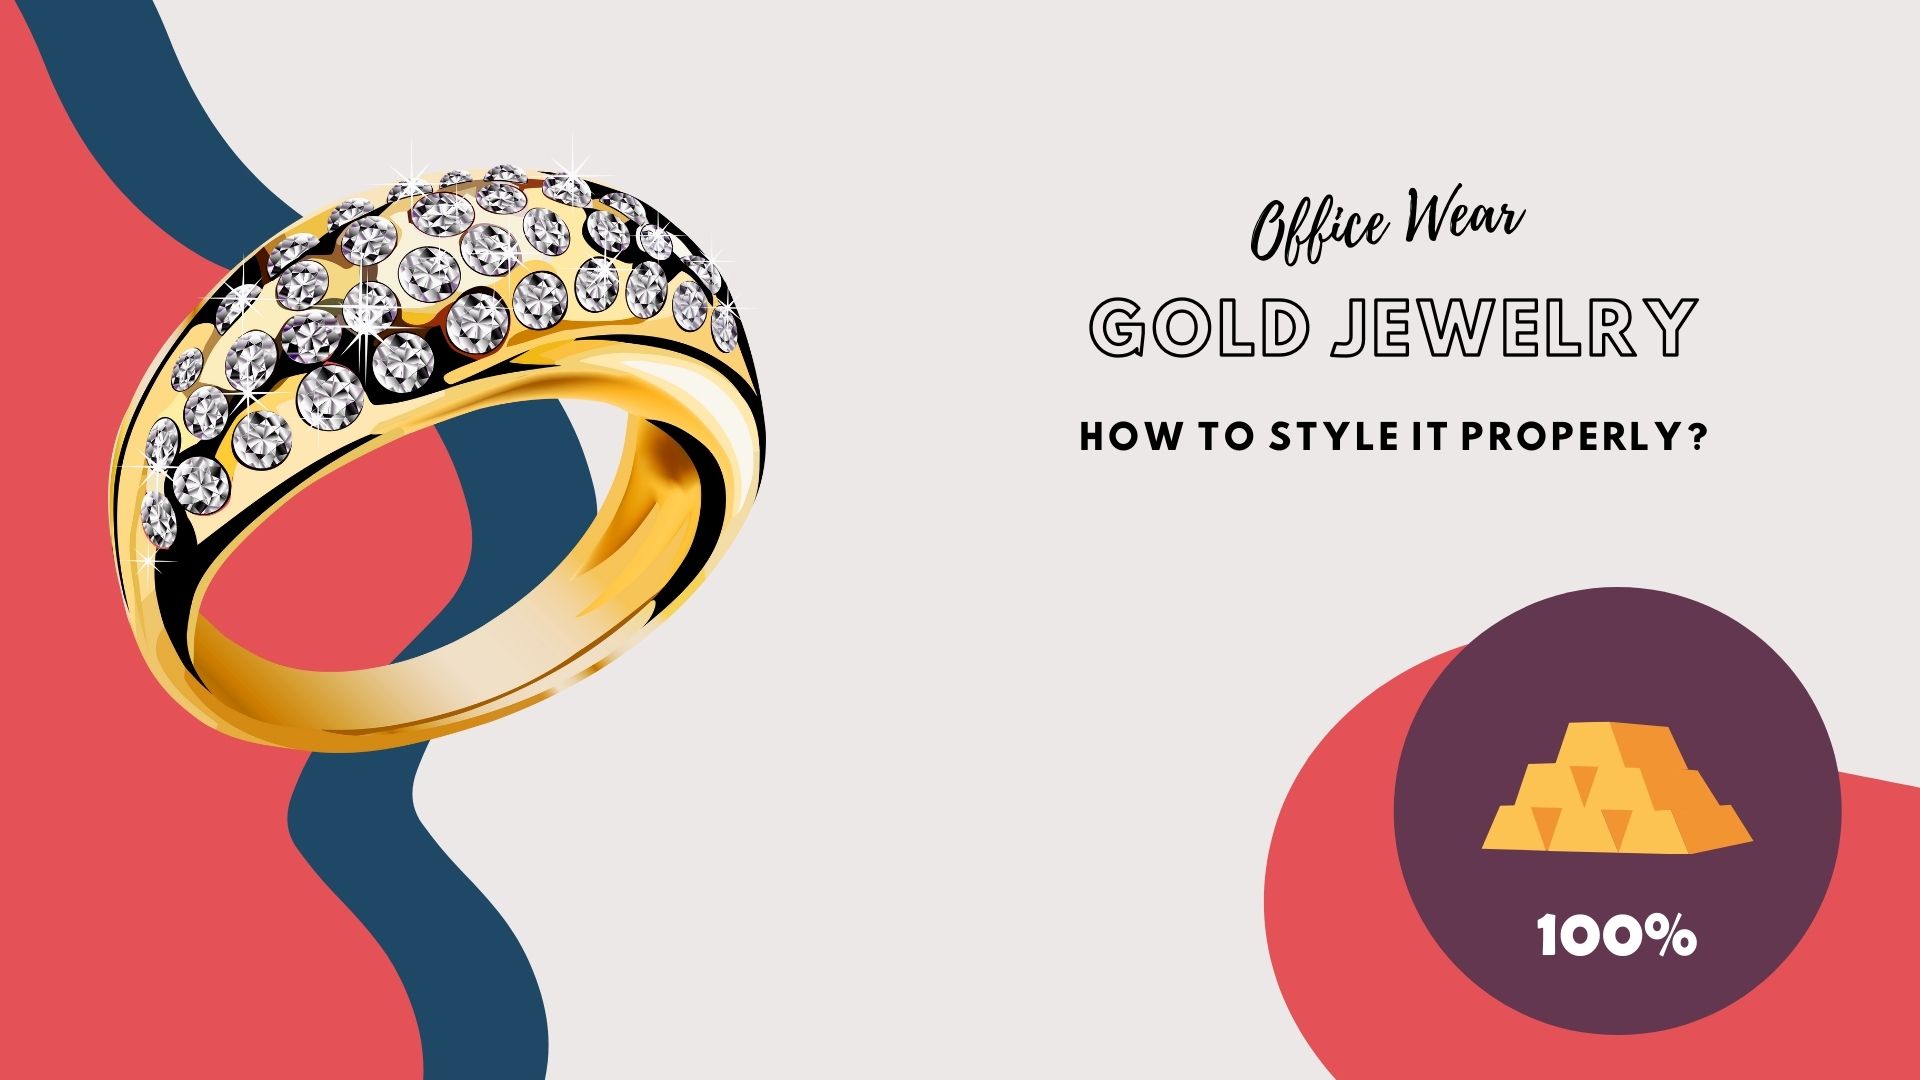 Office Wear Gold Jewelery – How To Style It Properly?